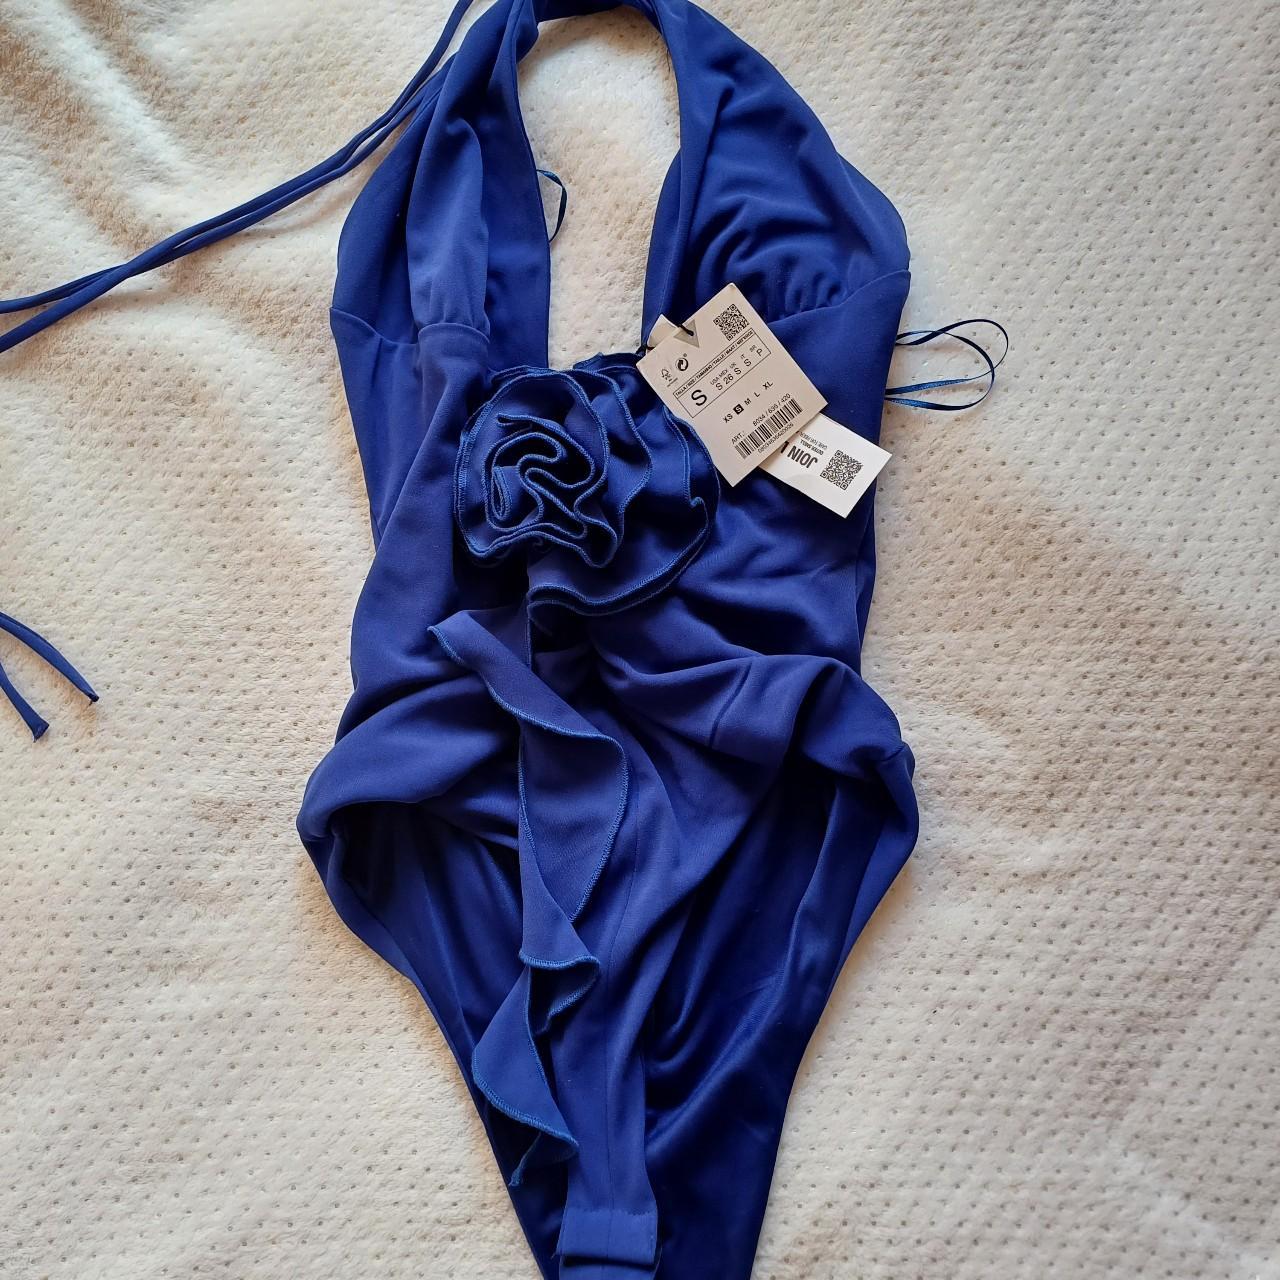 Buy the Zara Bodysuits Womens Knotted Cut Out Royal blue Size M